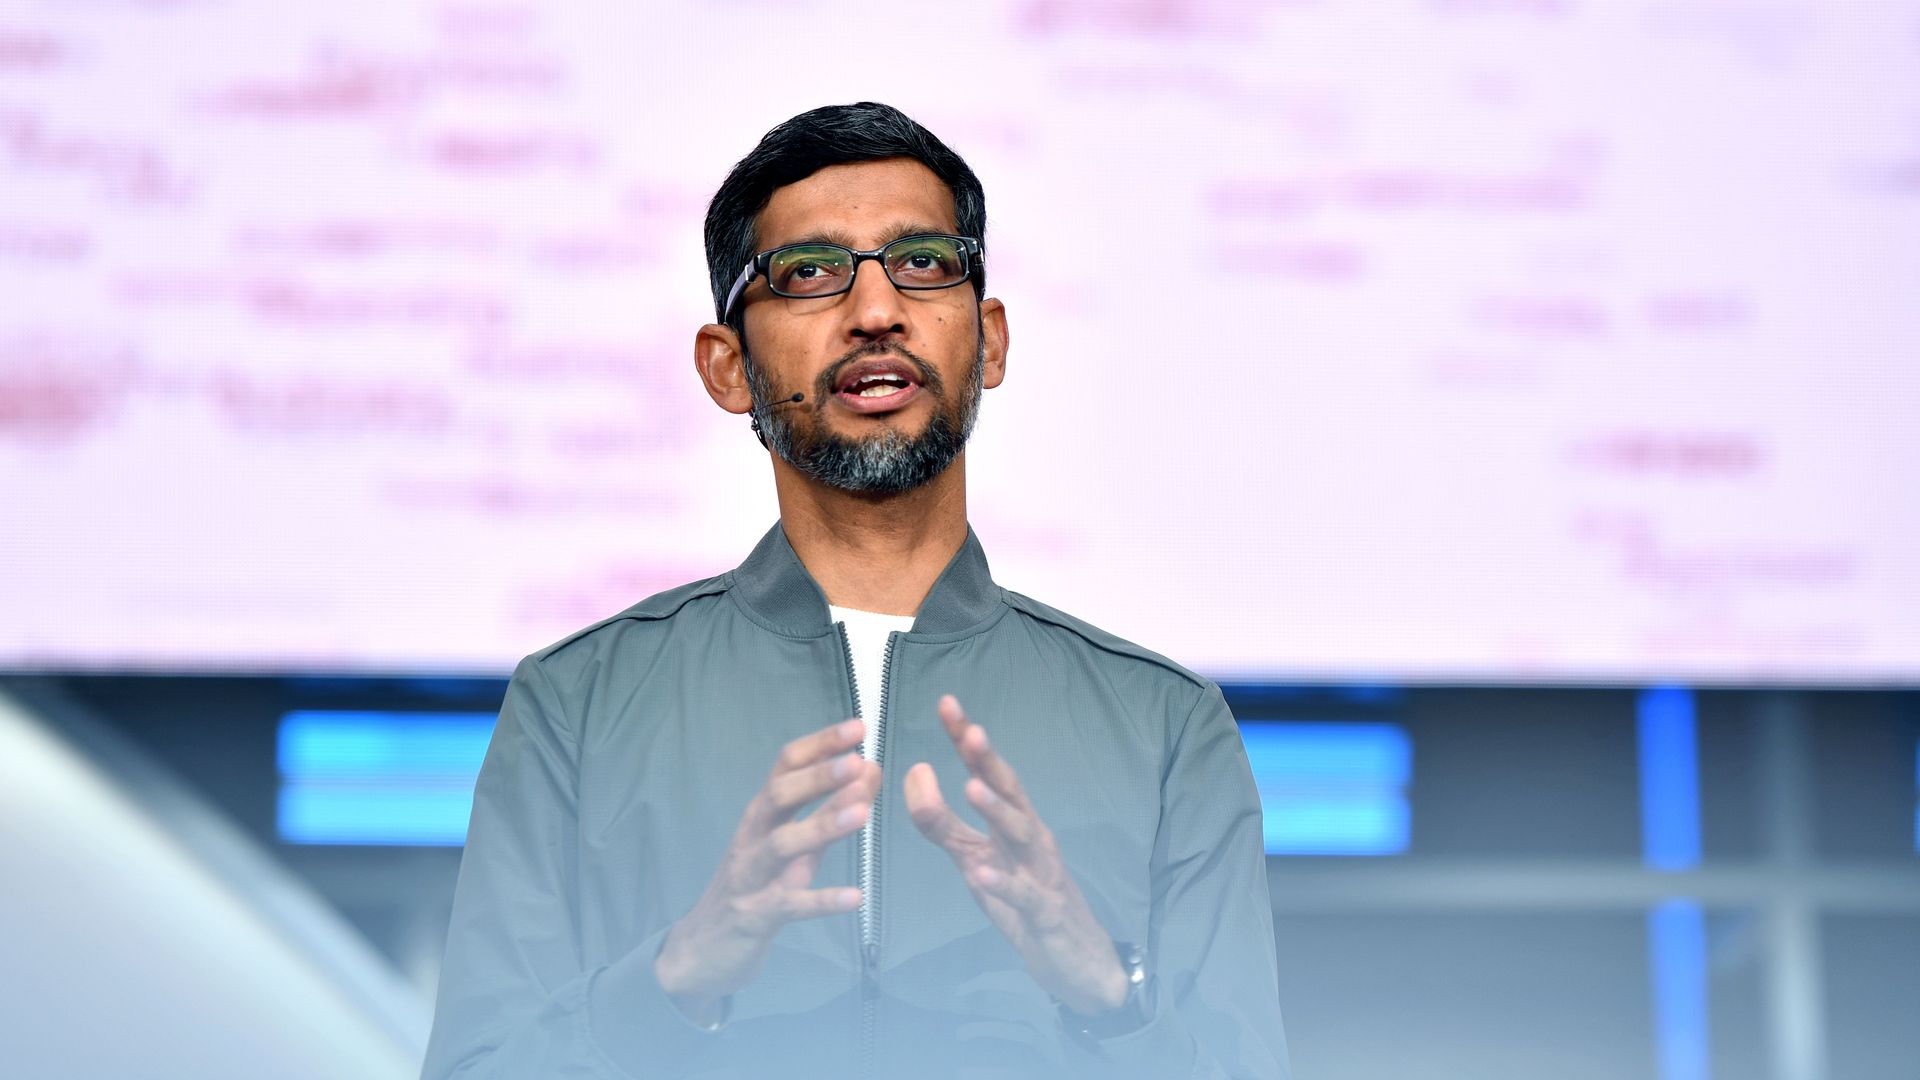 In this image, Sundar Pichai stands on stage and speaks to an audience while wearing a microphone and glasses